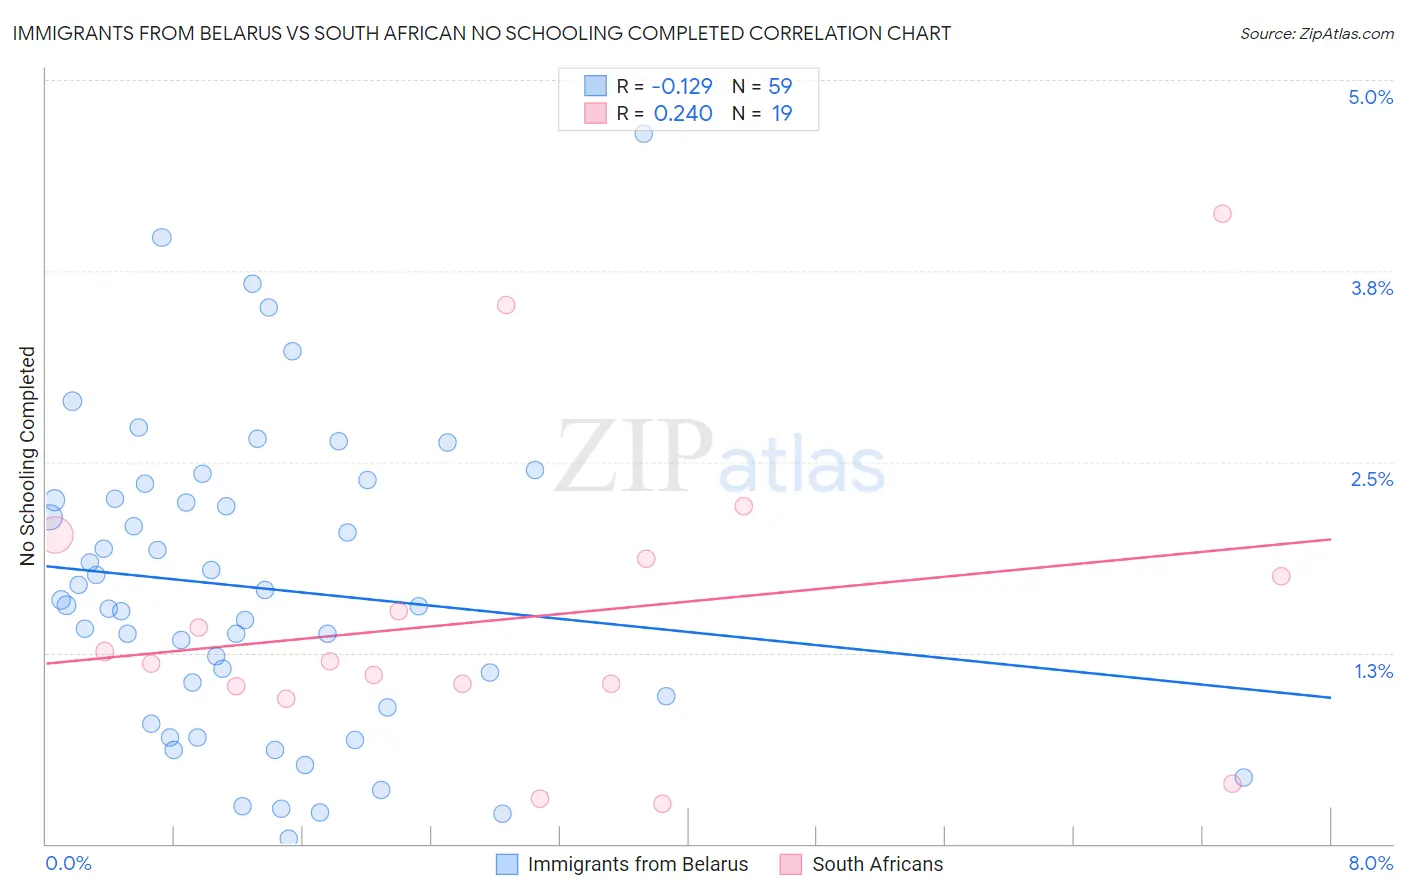 Immigrants from Belarus vs South African No Schooling Completed